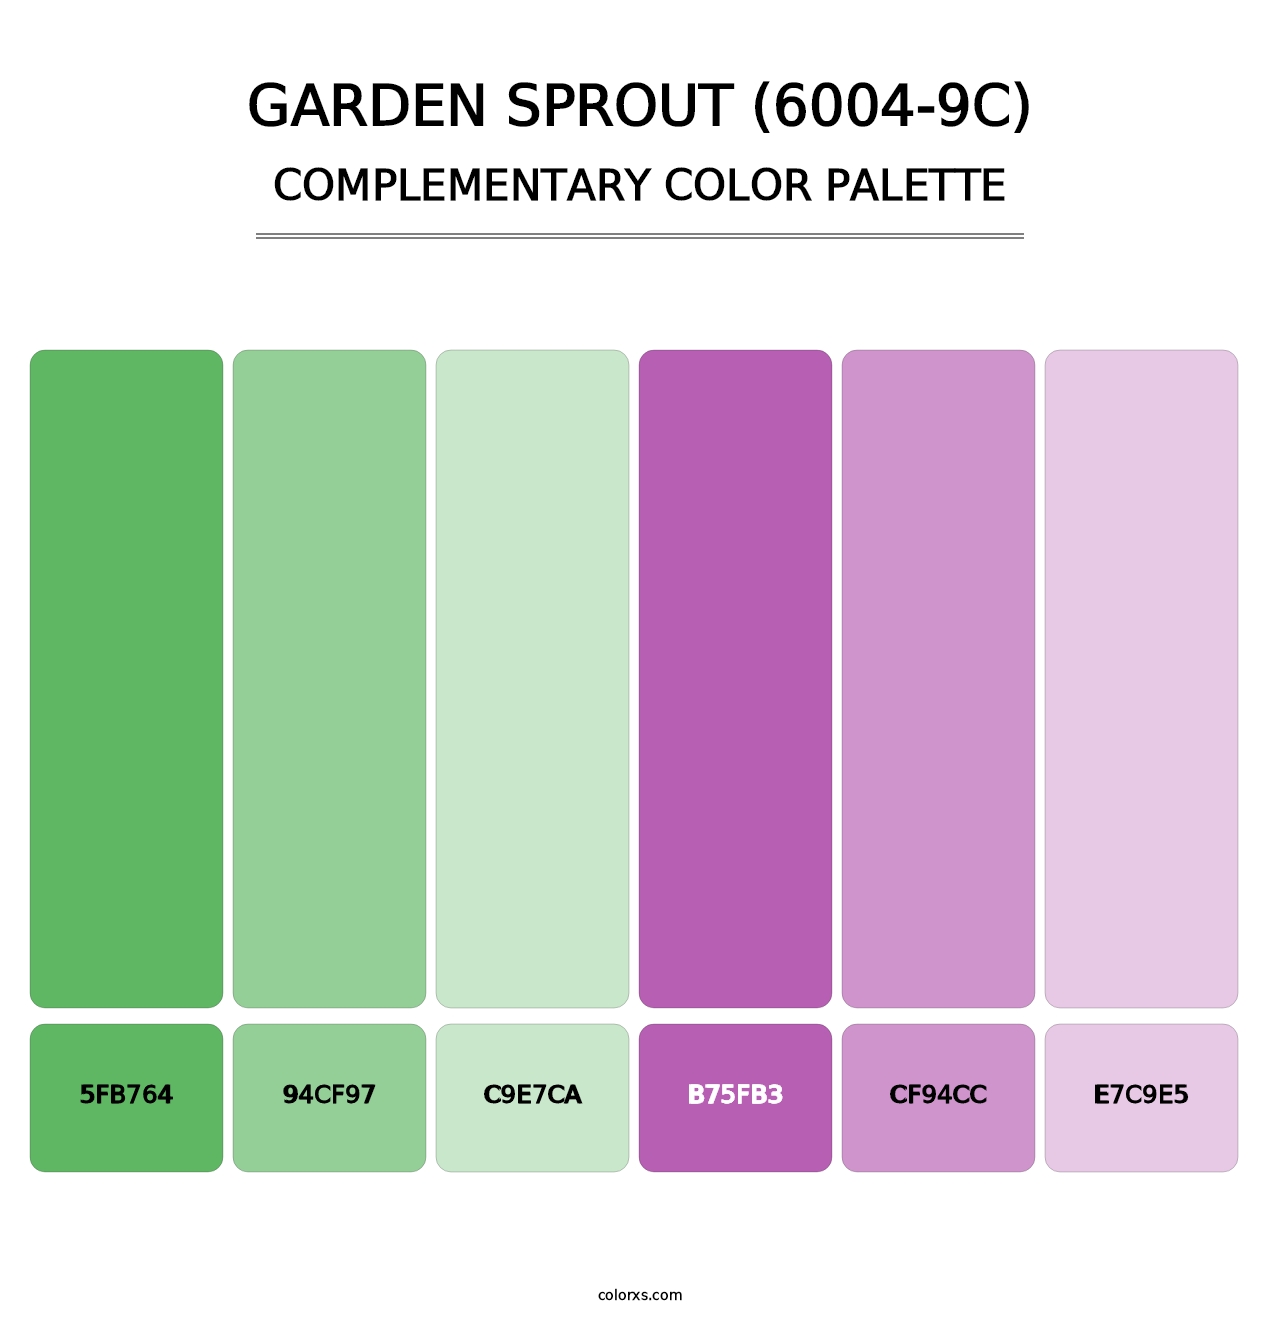 Garden Sprout (6004-9C) - Complementary Color Palette